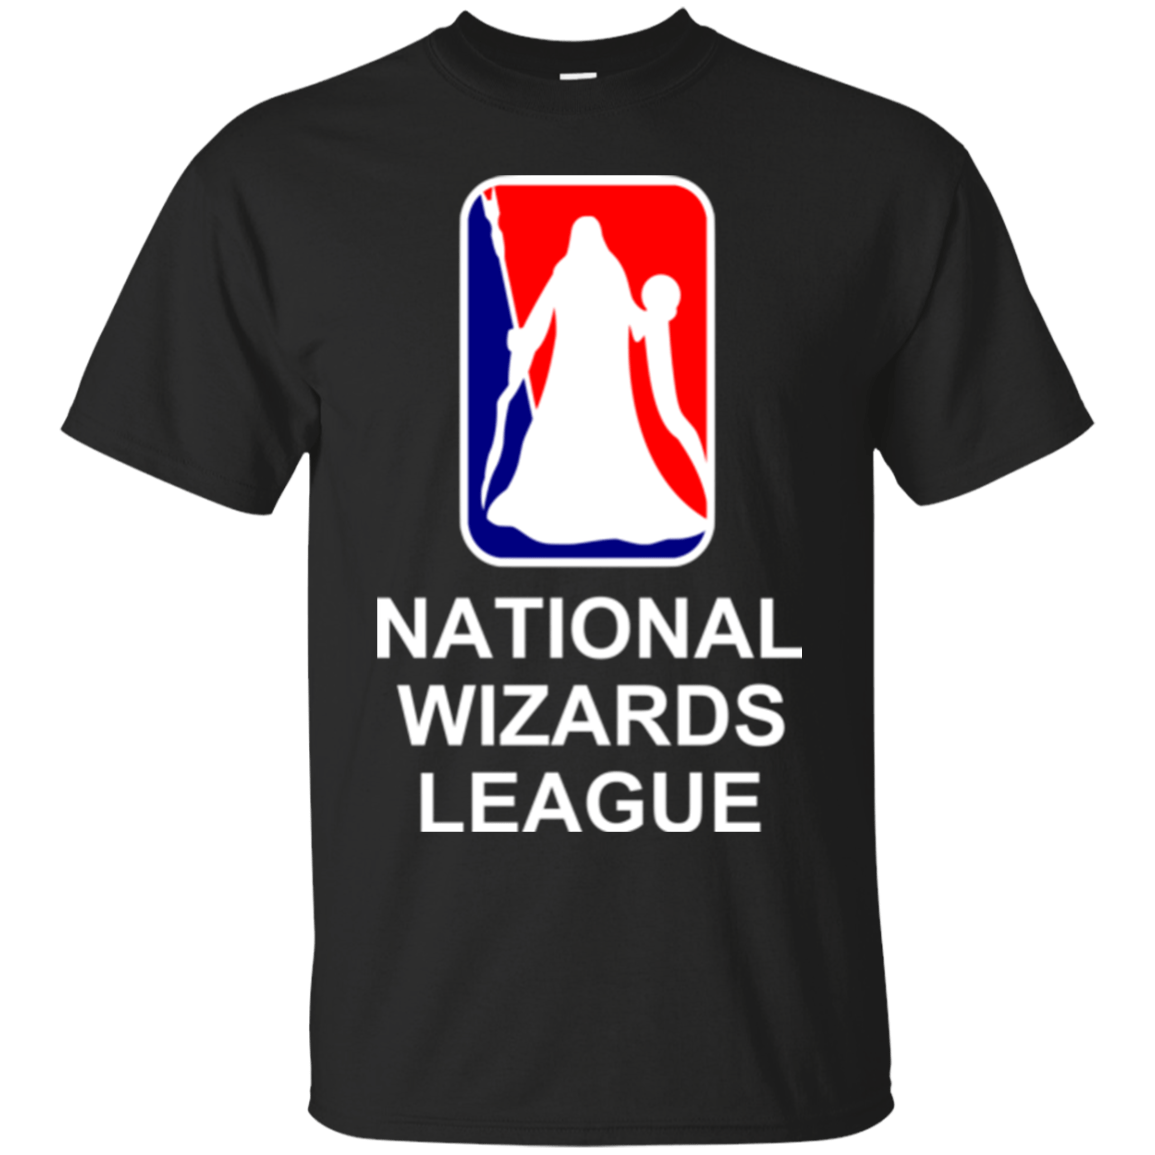 T-Shirts Black / Small National Wizards League T-Shirt